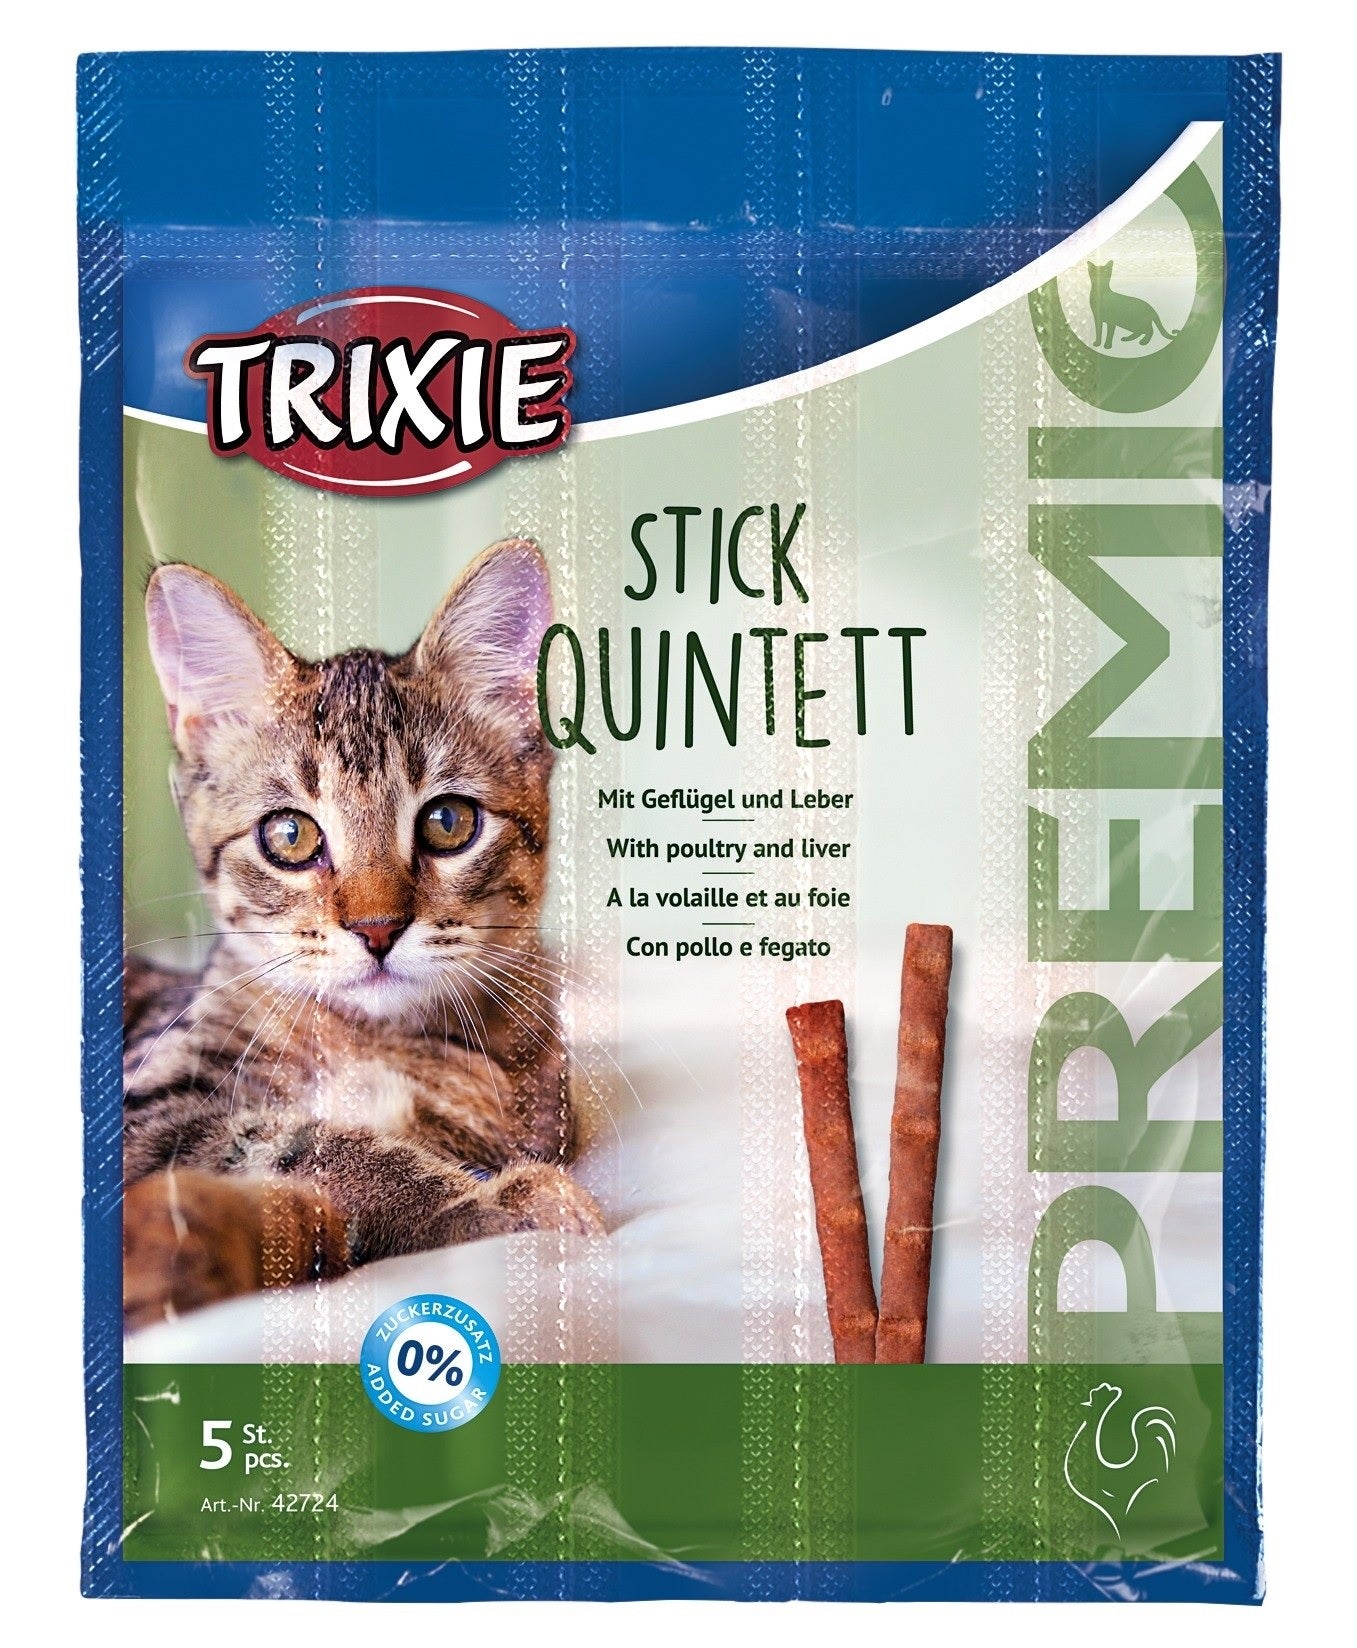 Stick Quintett - with poultry and liver 25g